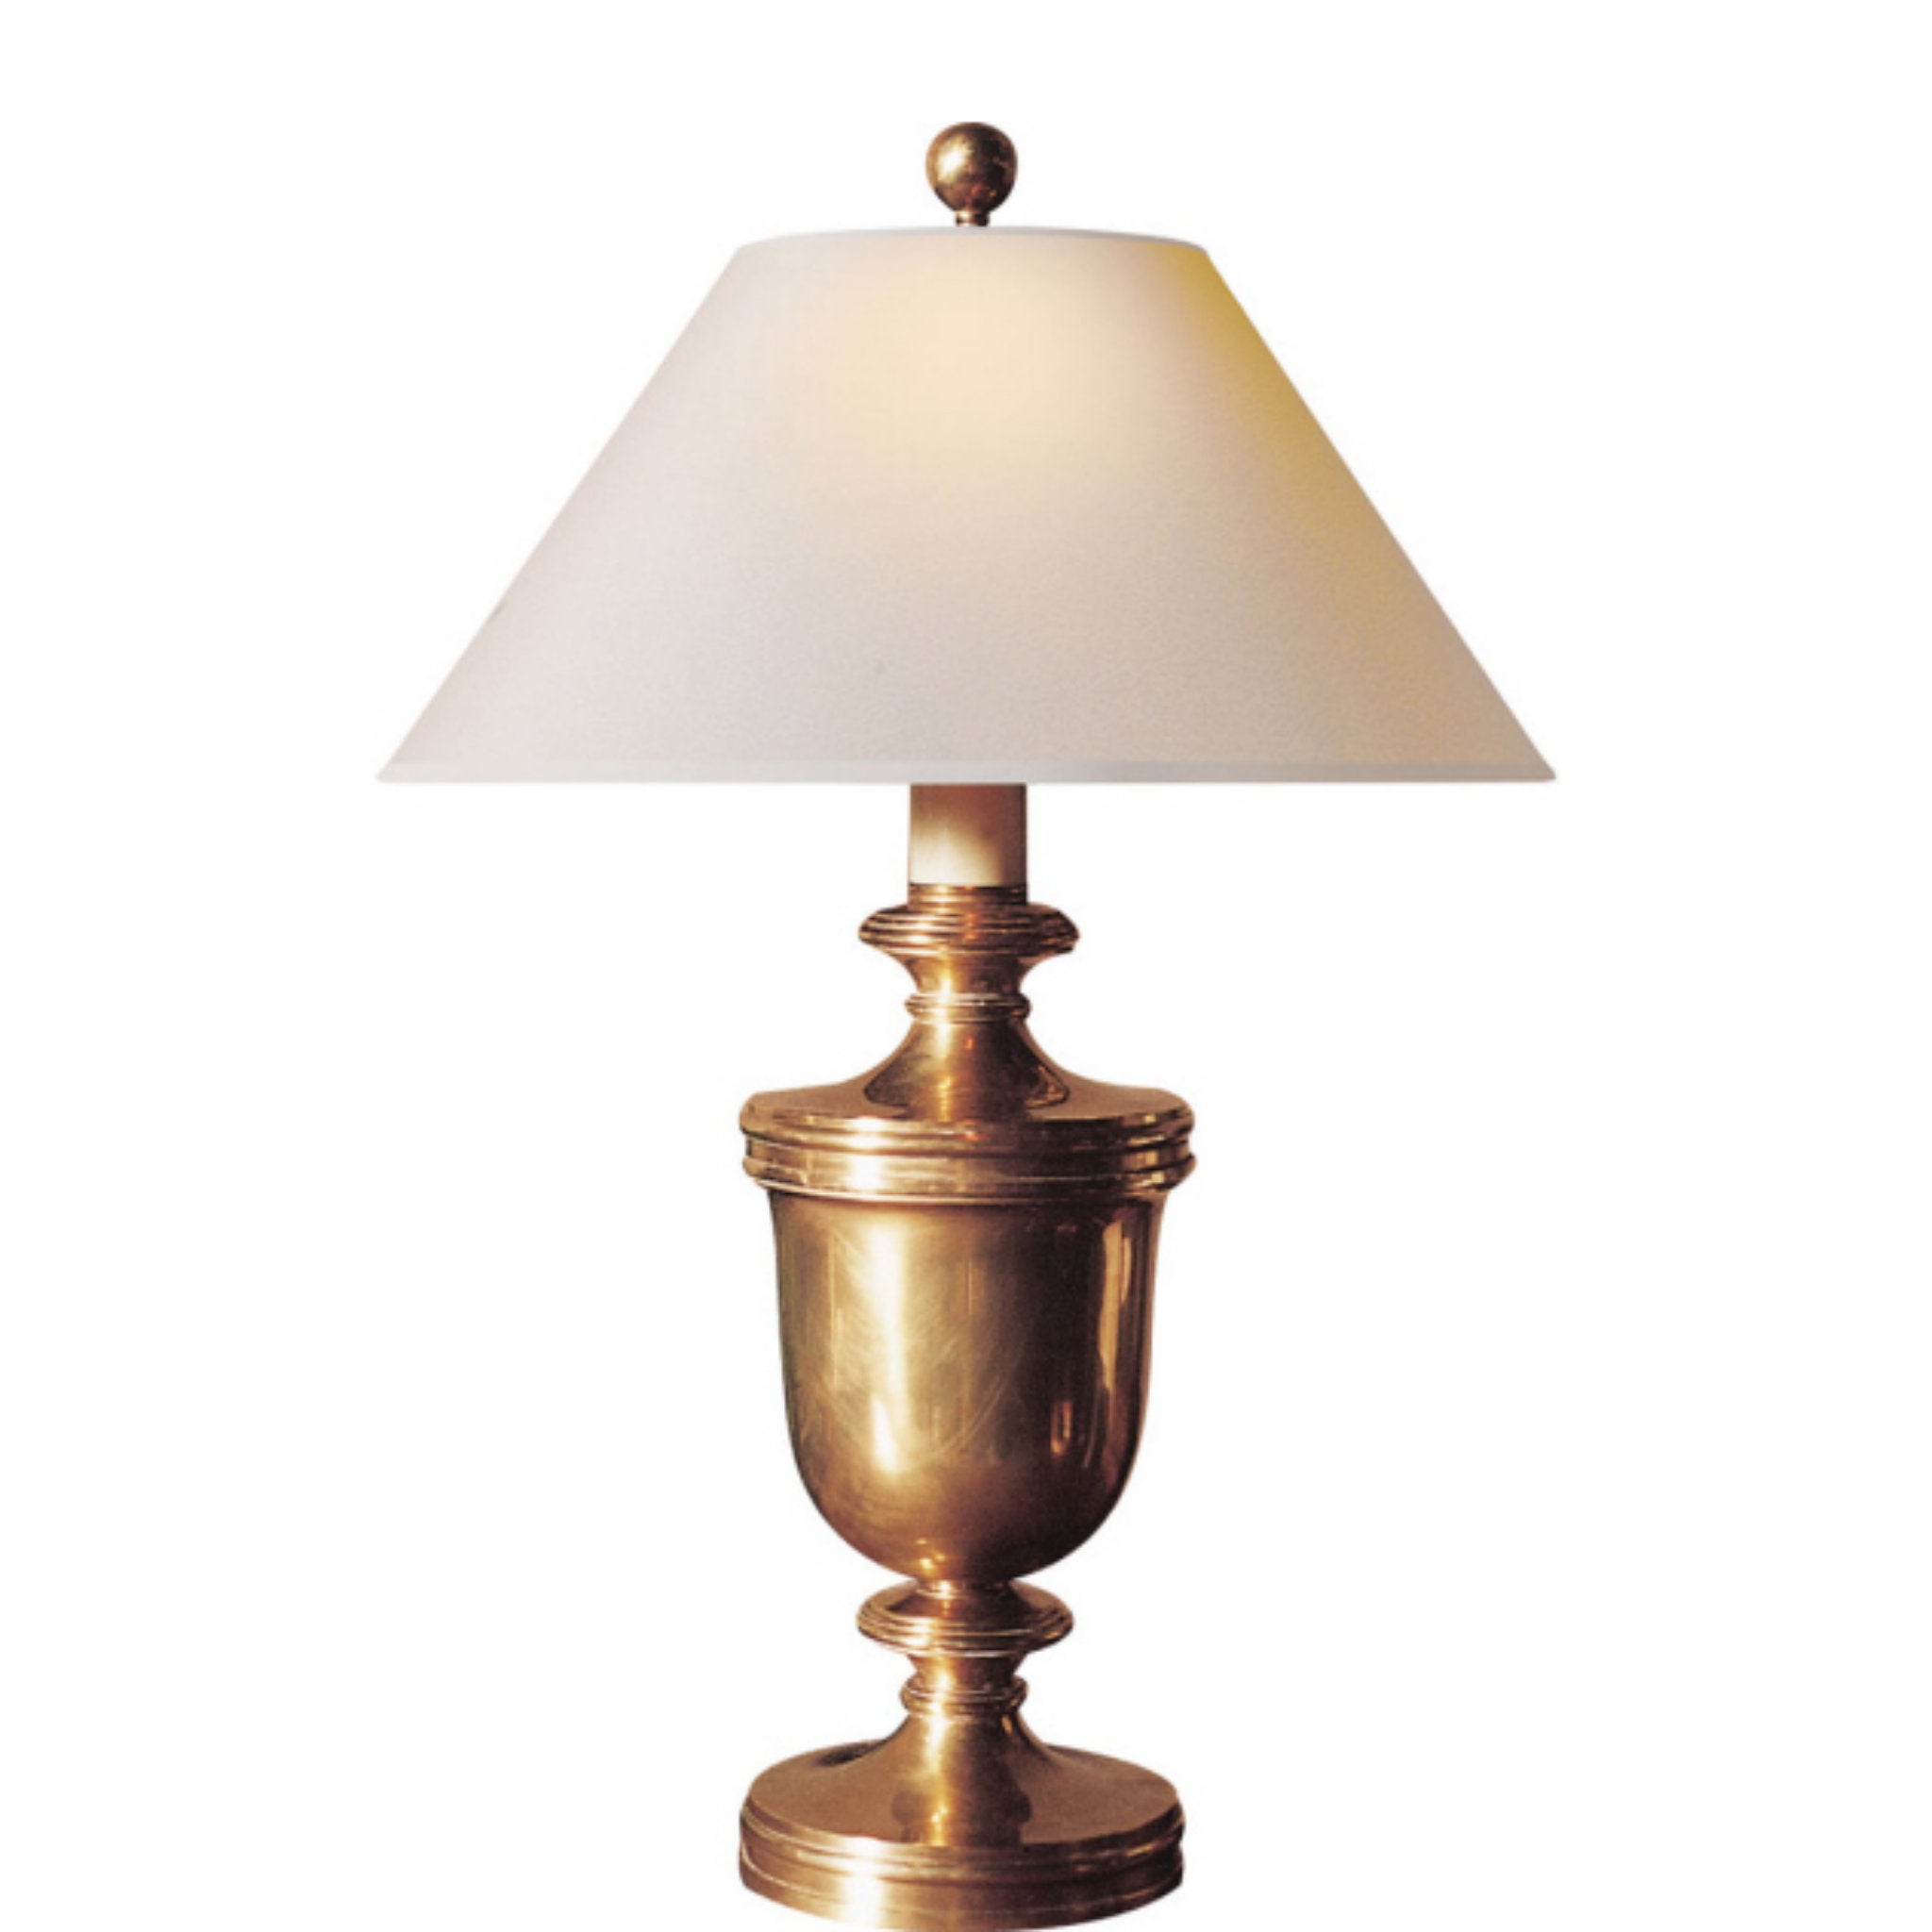 Chapman & Myers Classical Urn Form Medium Table Lamp in Antique-Burnished Brass with Natural Paper Shade